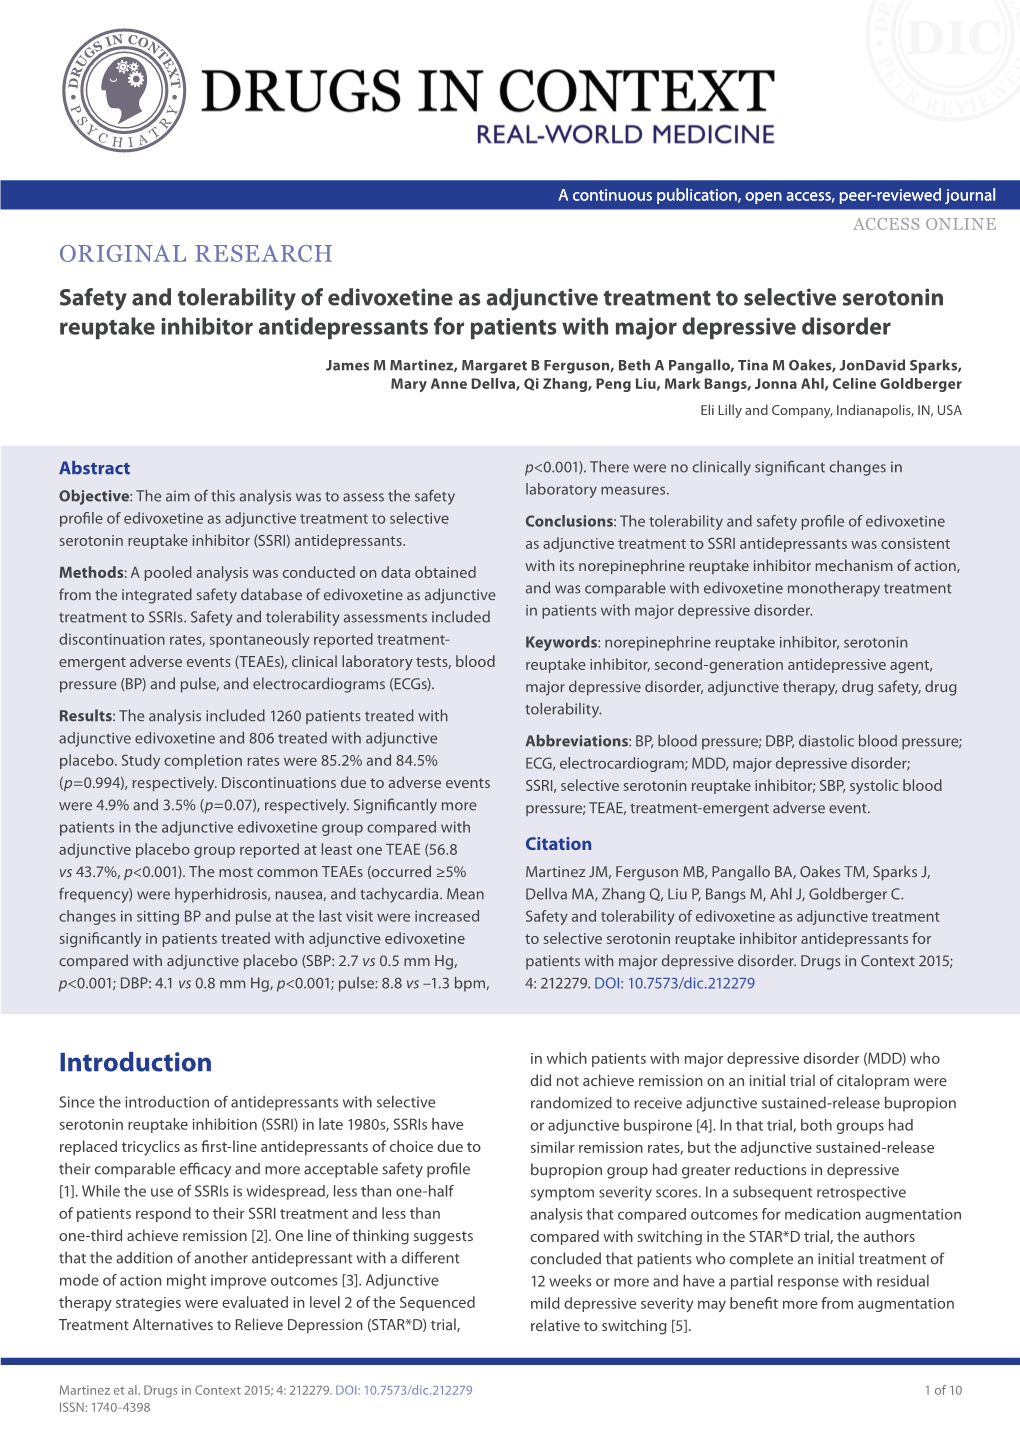 Safety and Tolerability of Edivoxetine As Adjunctive Treatment to Selective Serotonin Reuptake Inhibitor Antidepressants for Patients with Major Depressive Disorder